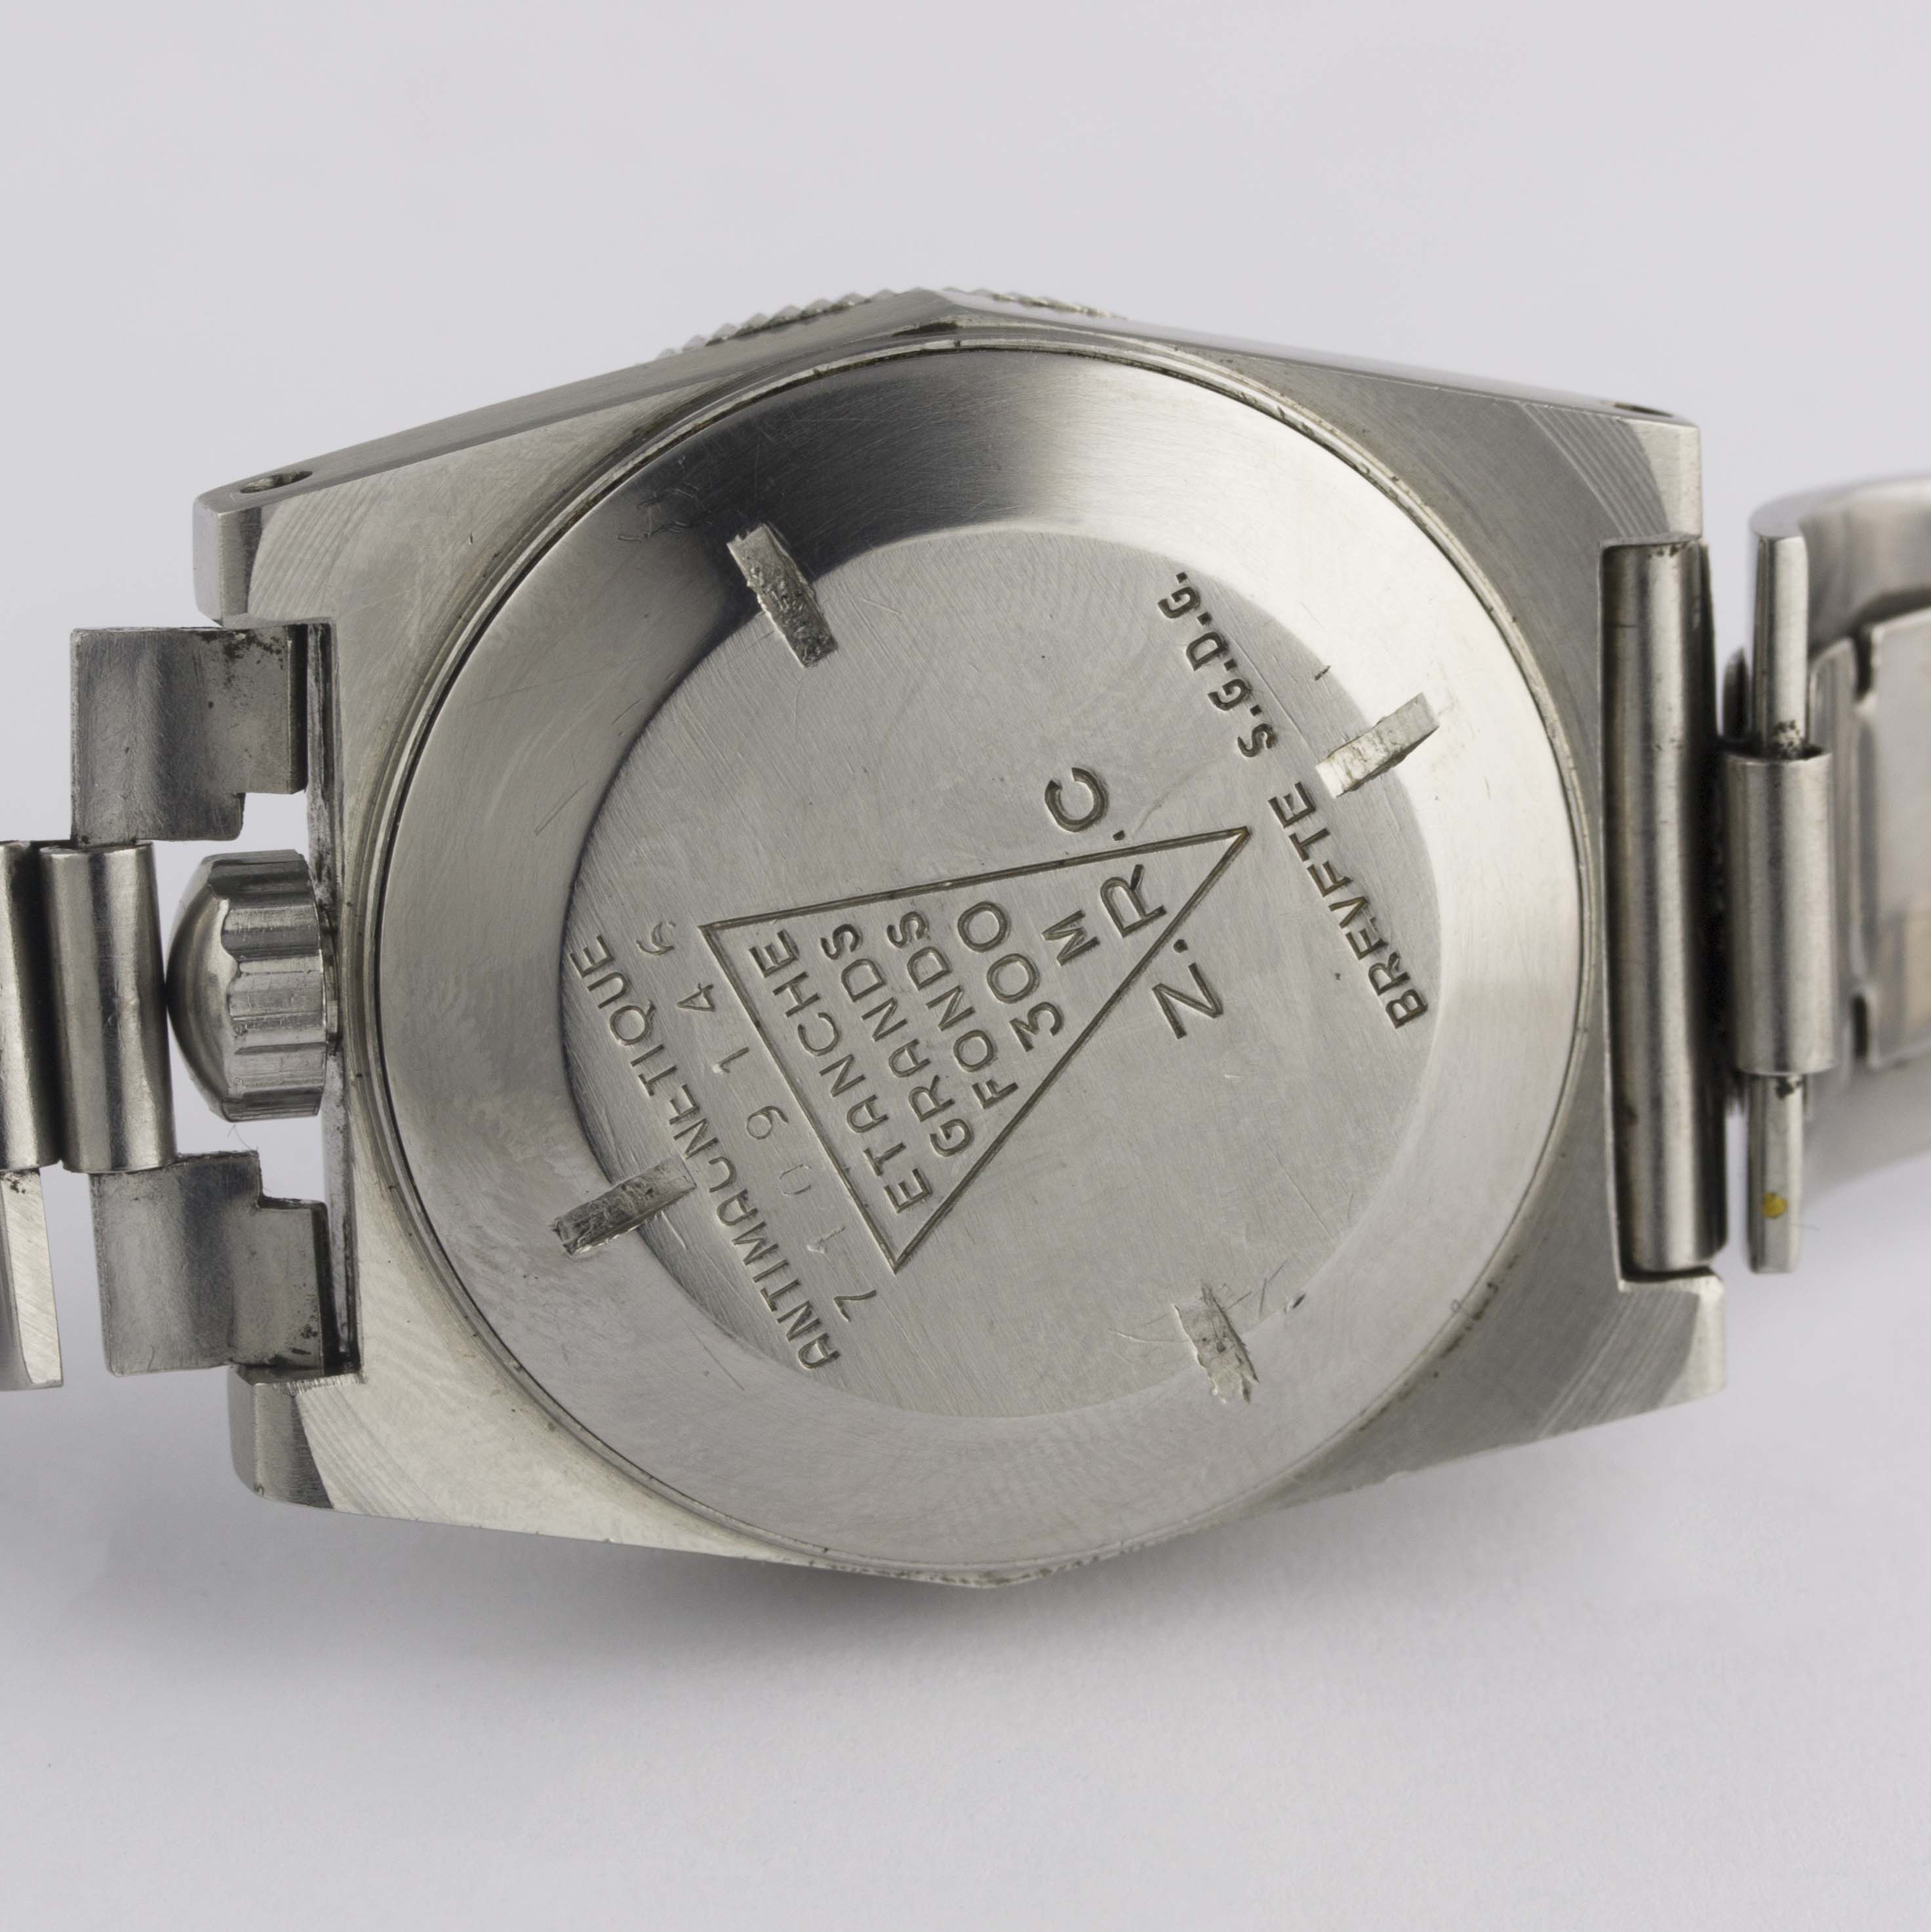 A VERY RARE GENTLEMAN'S STAINLESS STEEL Z.R.C. ETANCHE GRANDS FONDS 300M "SERIES III" AUTOMATIC - Image 7 of 11